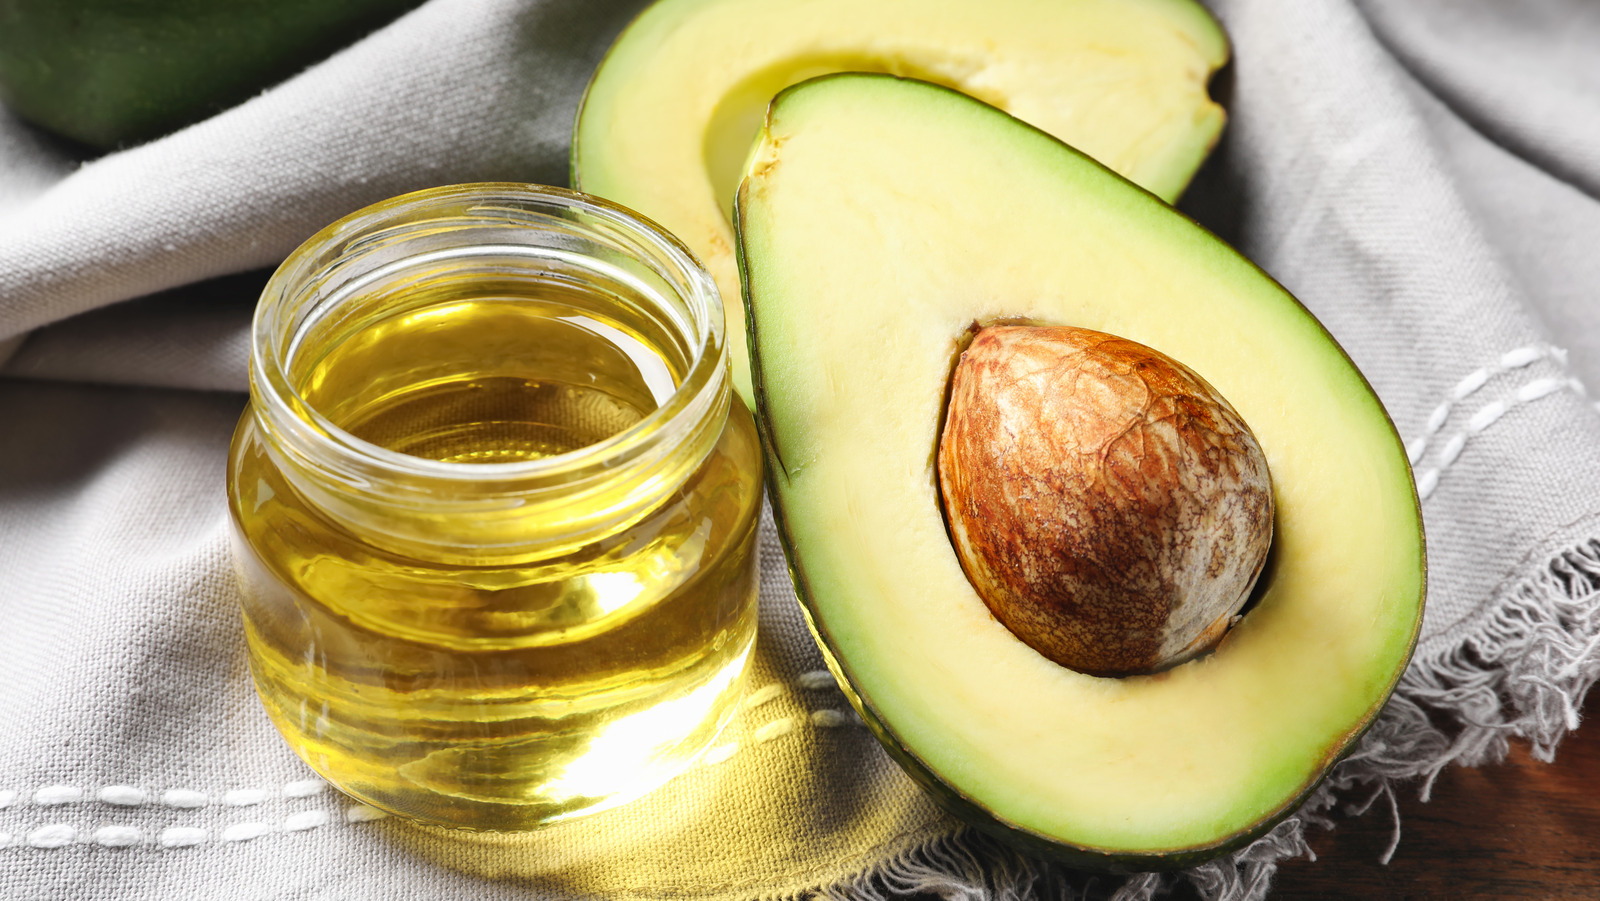 What Is Avocado Oil?